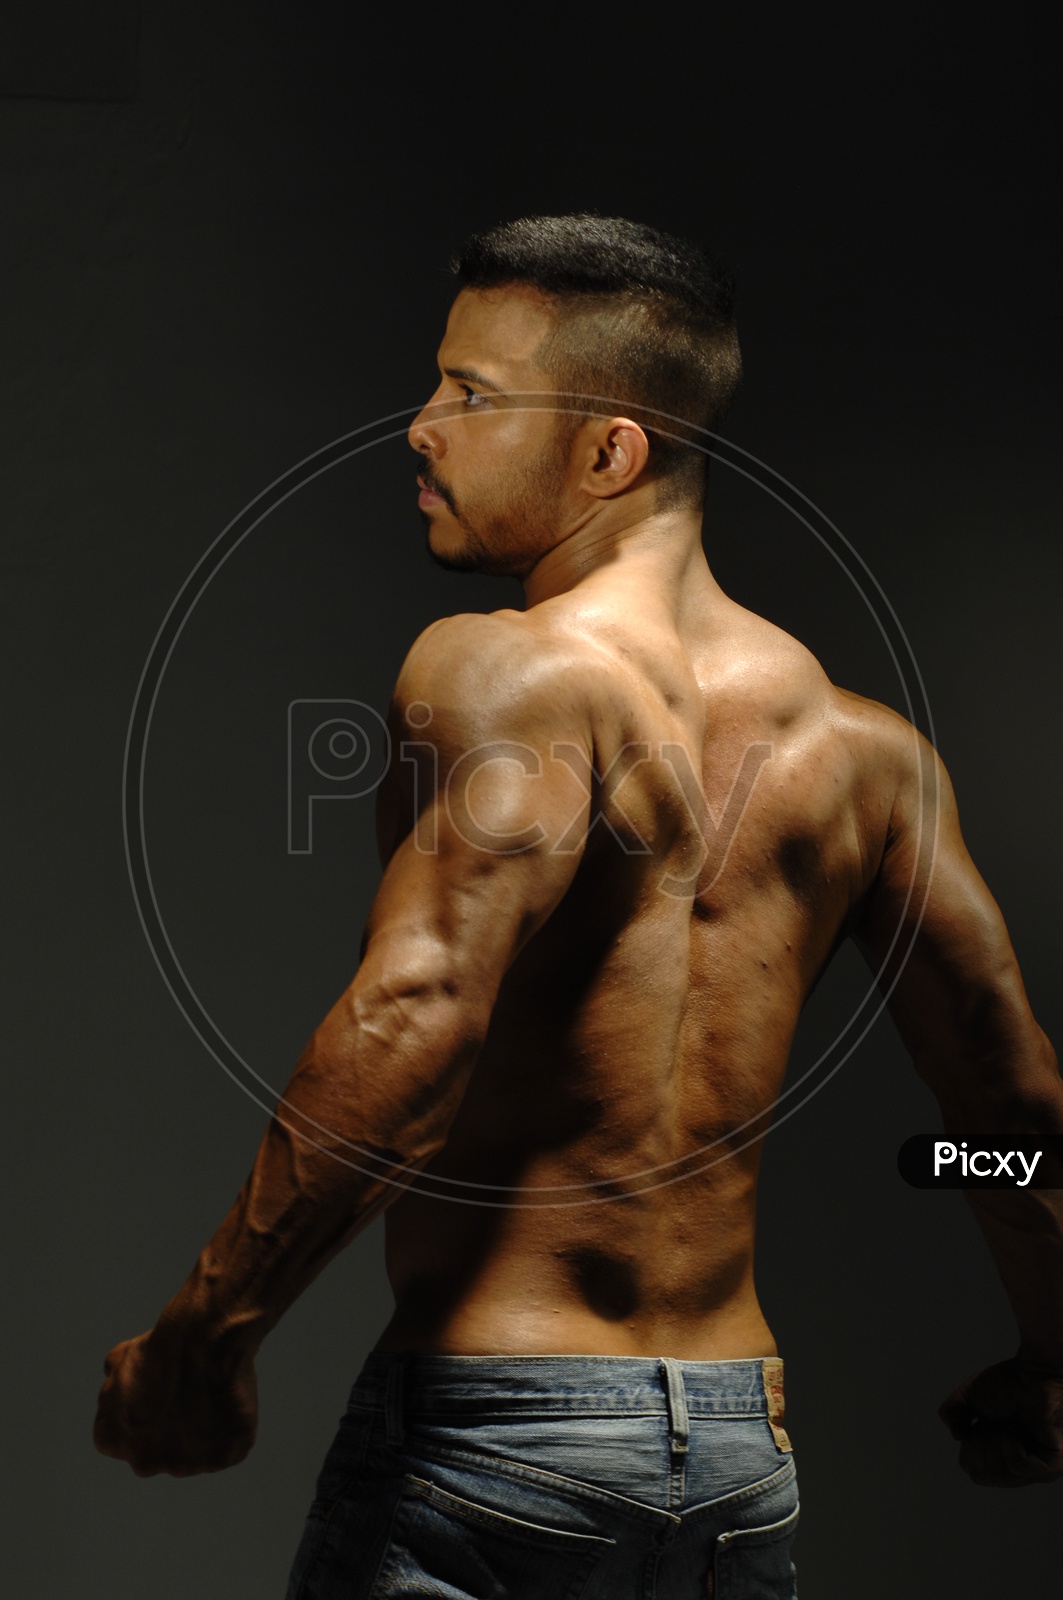 Indian Young Male Body Builder Fitness Stock Photo 1599050950 | Shutterstock